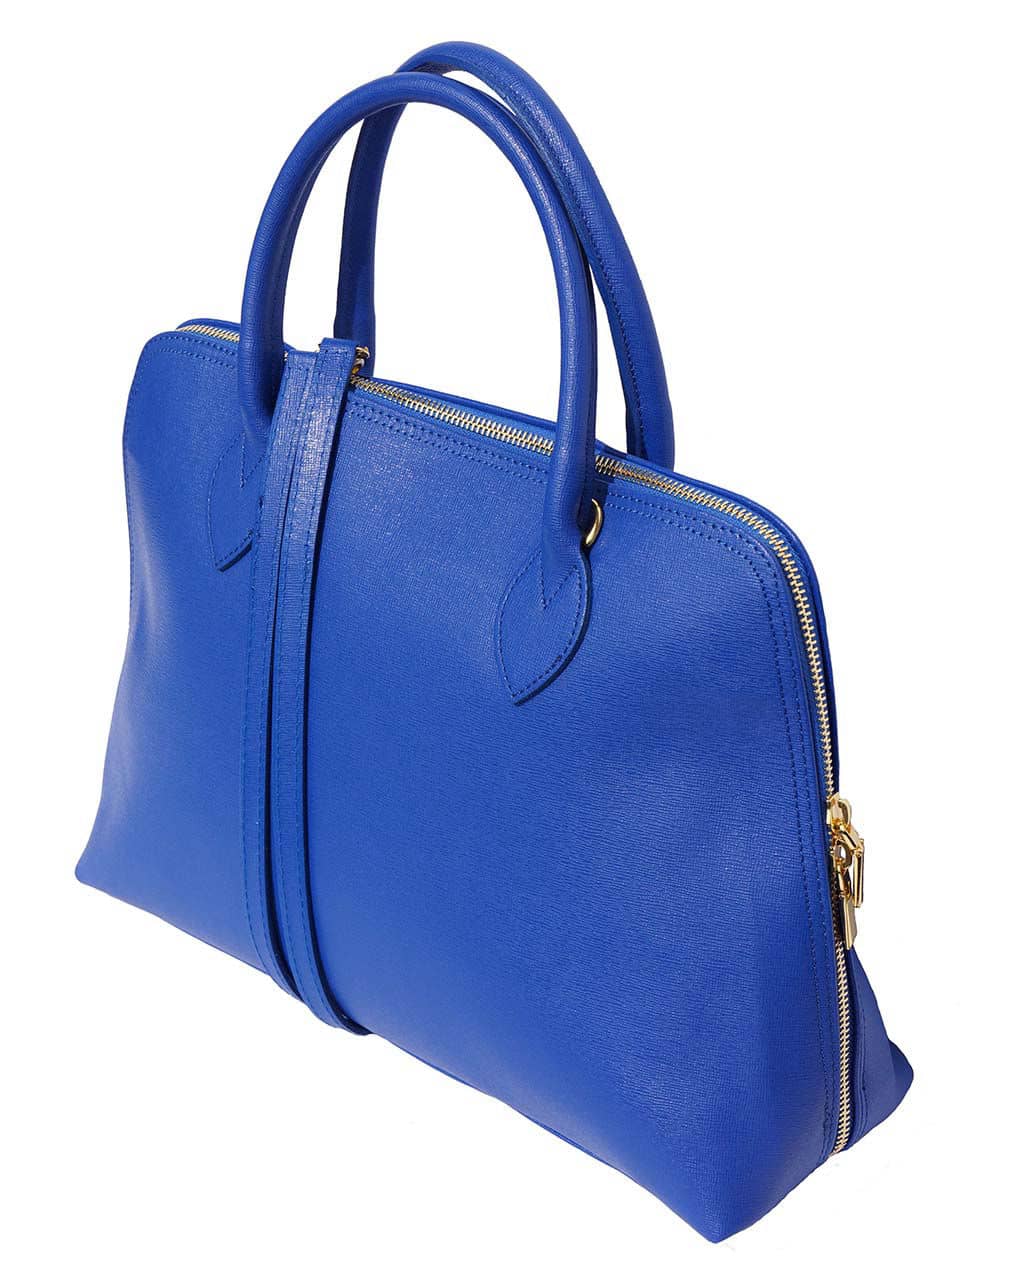 Private label of Italian handbags, made in Italy bags